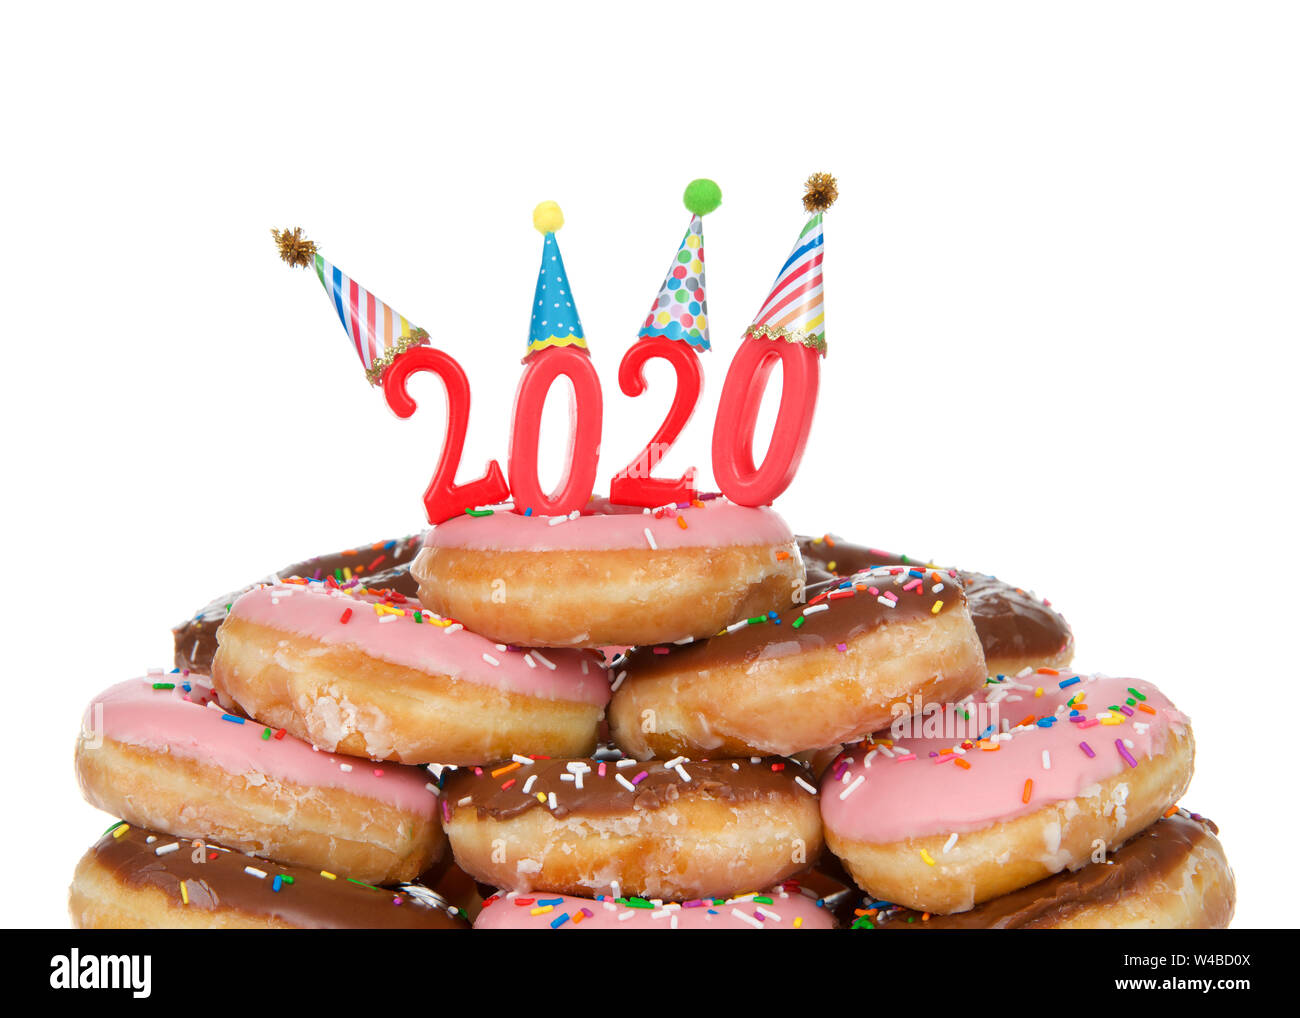 Variety of glazed donuts stacked with Happy 2020 candles wearing party hats, isolated on white. Happy New Year theme. Stock Photo